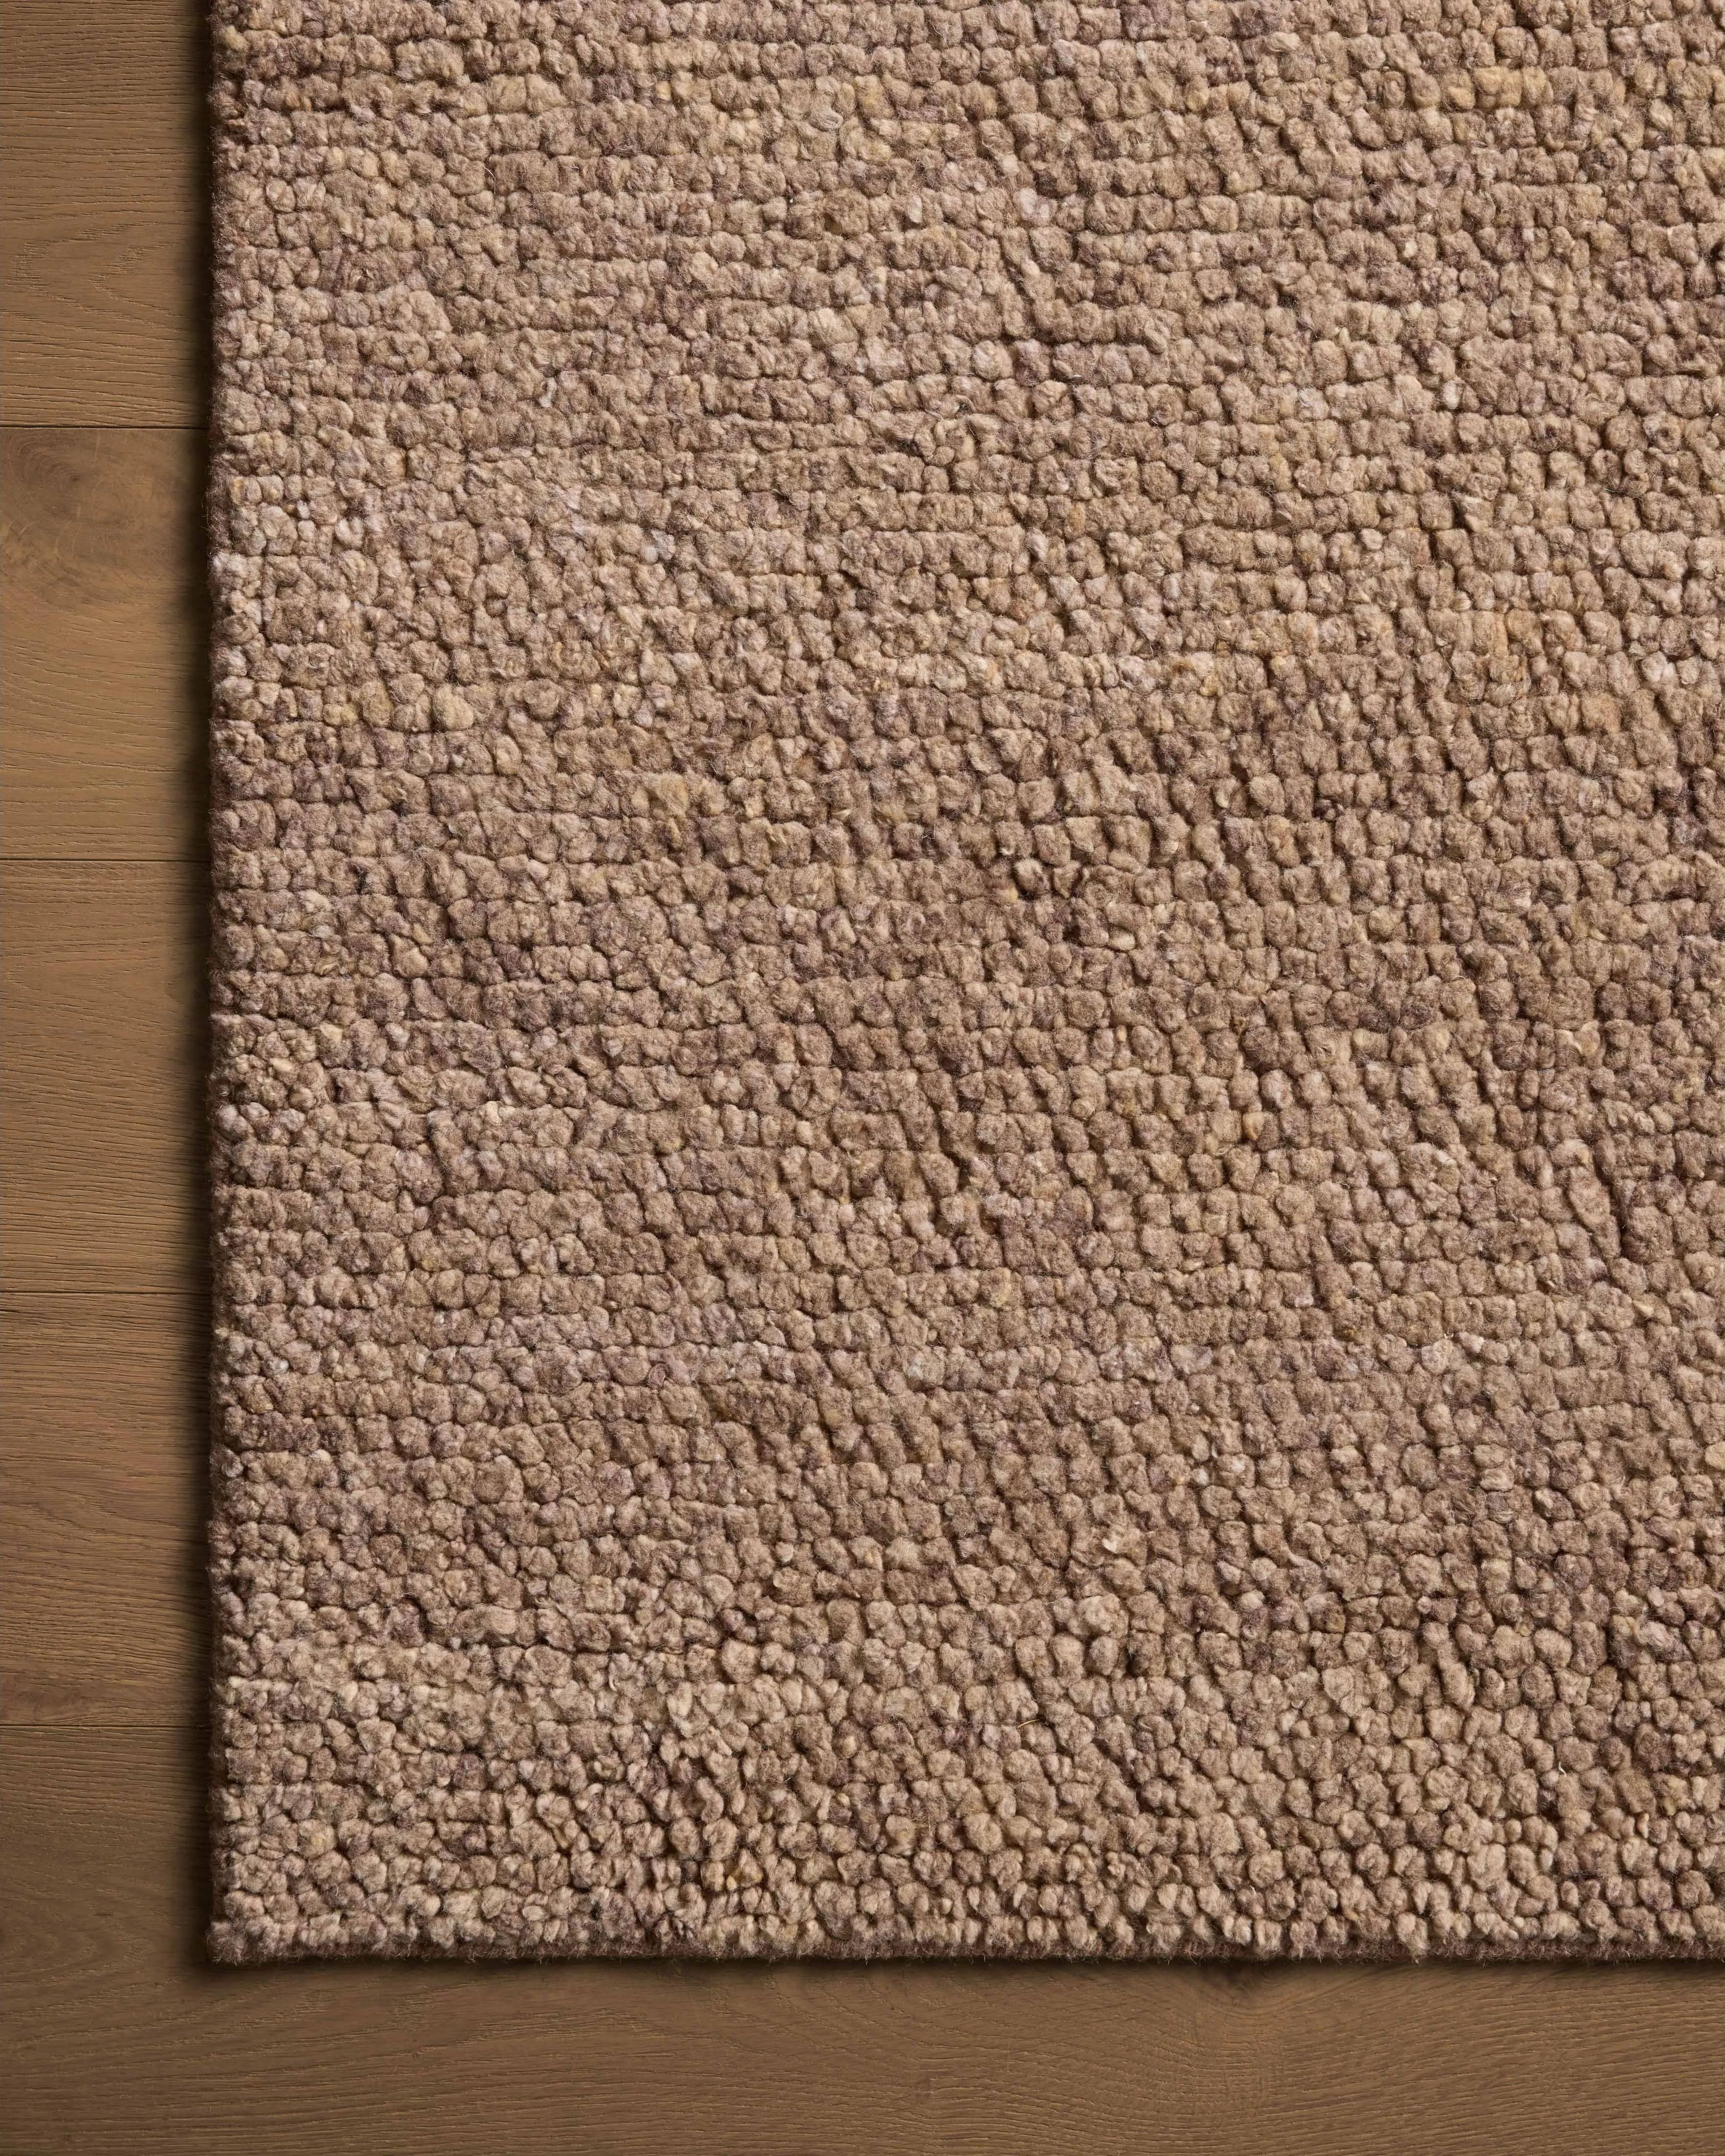 With versatile earth tones and a chunky, hand-knotted texture resembling tiny pebbles, the Frida Dark Taupe Rug by Brigette Romanek x Loloi can ground any room with a sense of elevated ease. Each area rug features a subtle nuance in color variation due to the handmade nature of its construction and has a pleasantly nubby softness underfoot. Amethyst Home provides interior design, new home construction design consulting, vintage area rugs, and lighting in the Des Moines metro area.